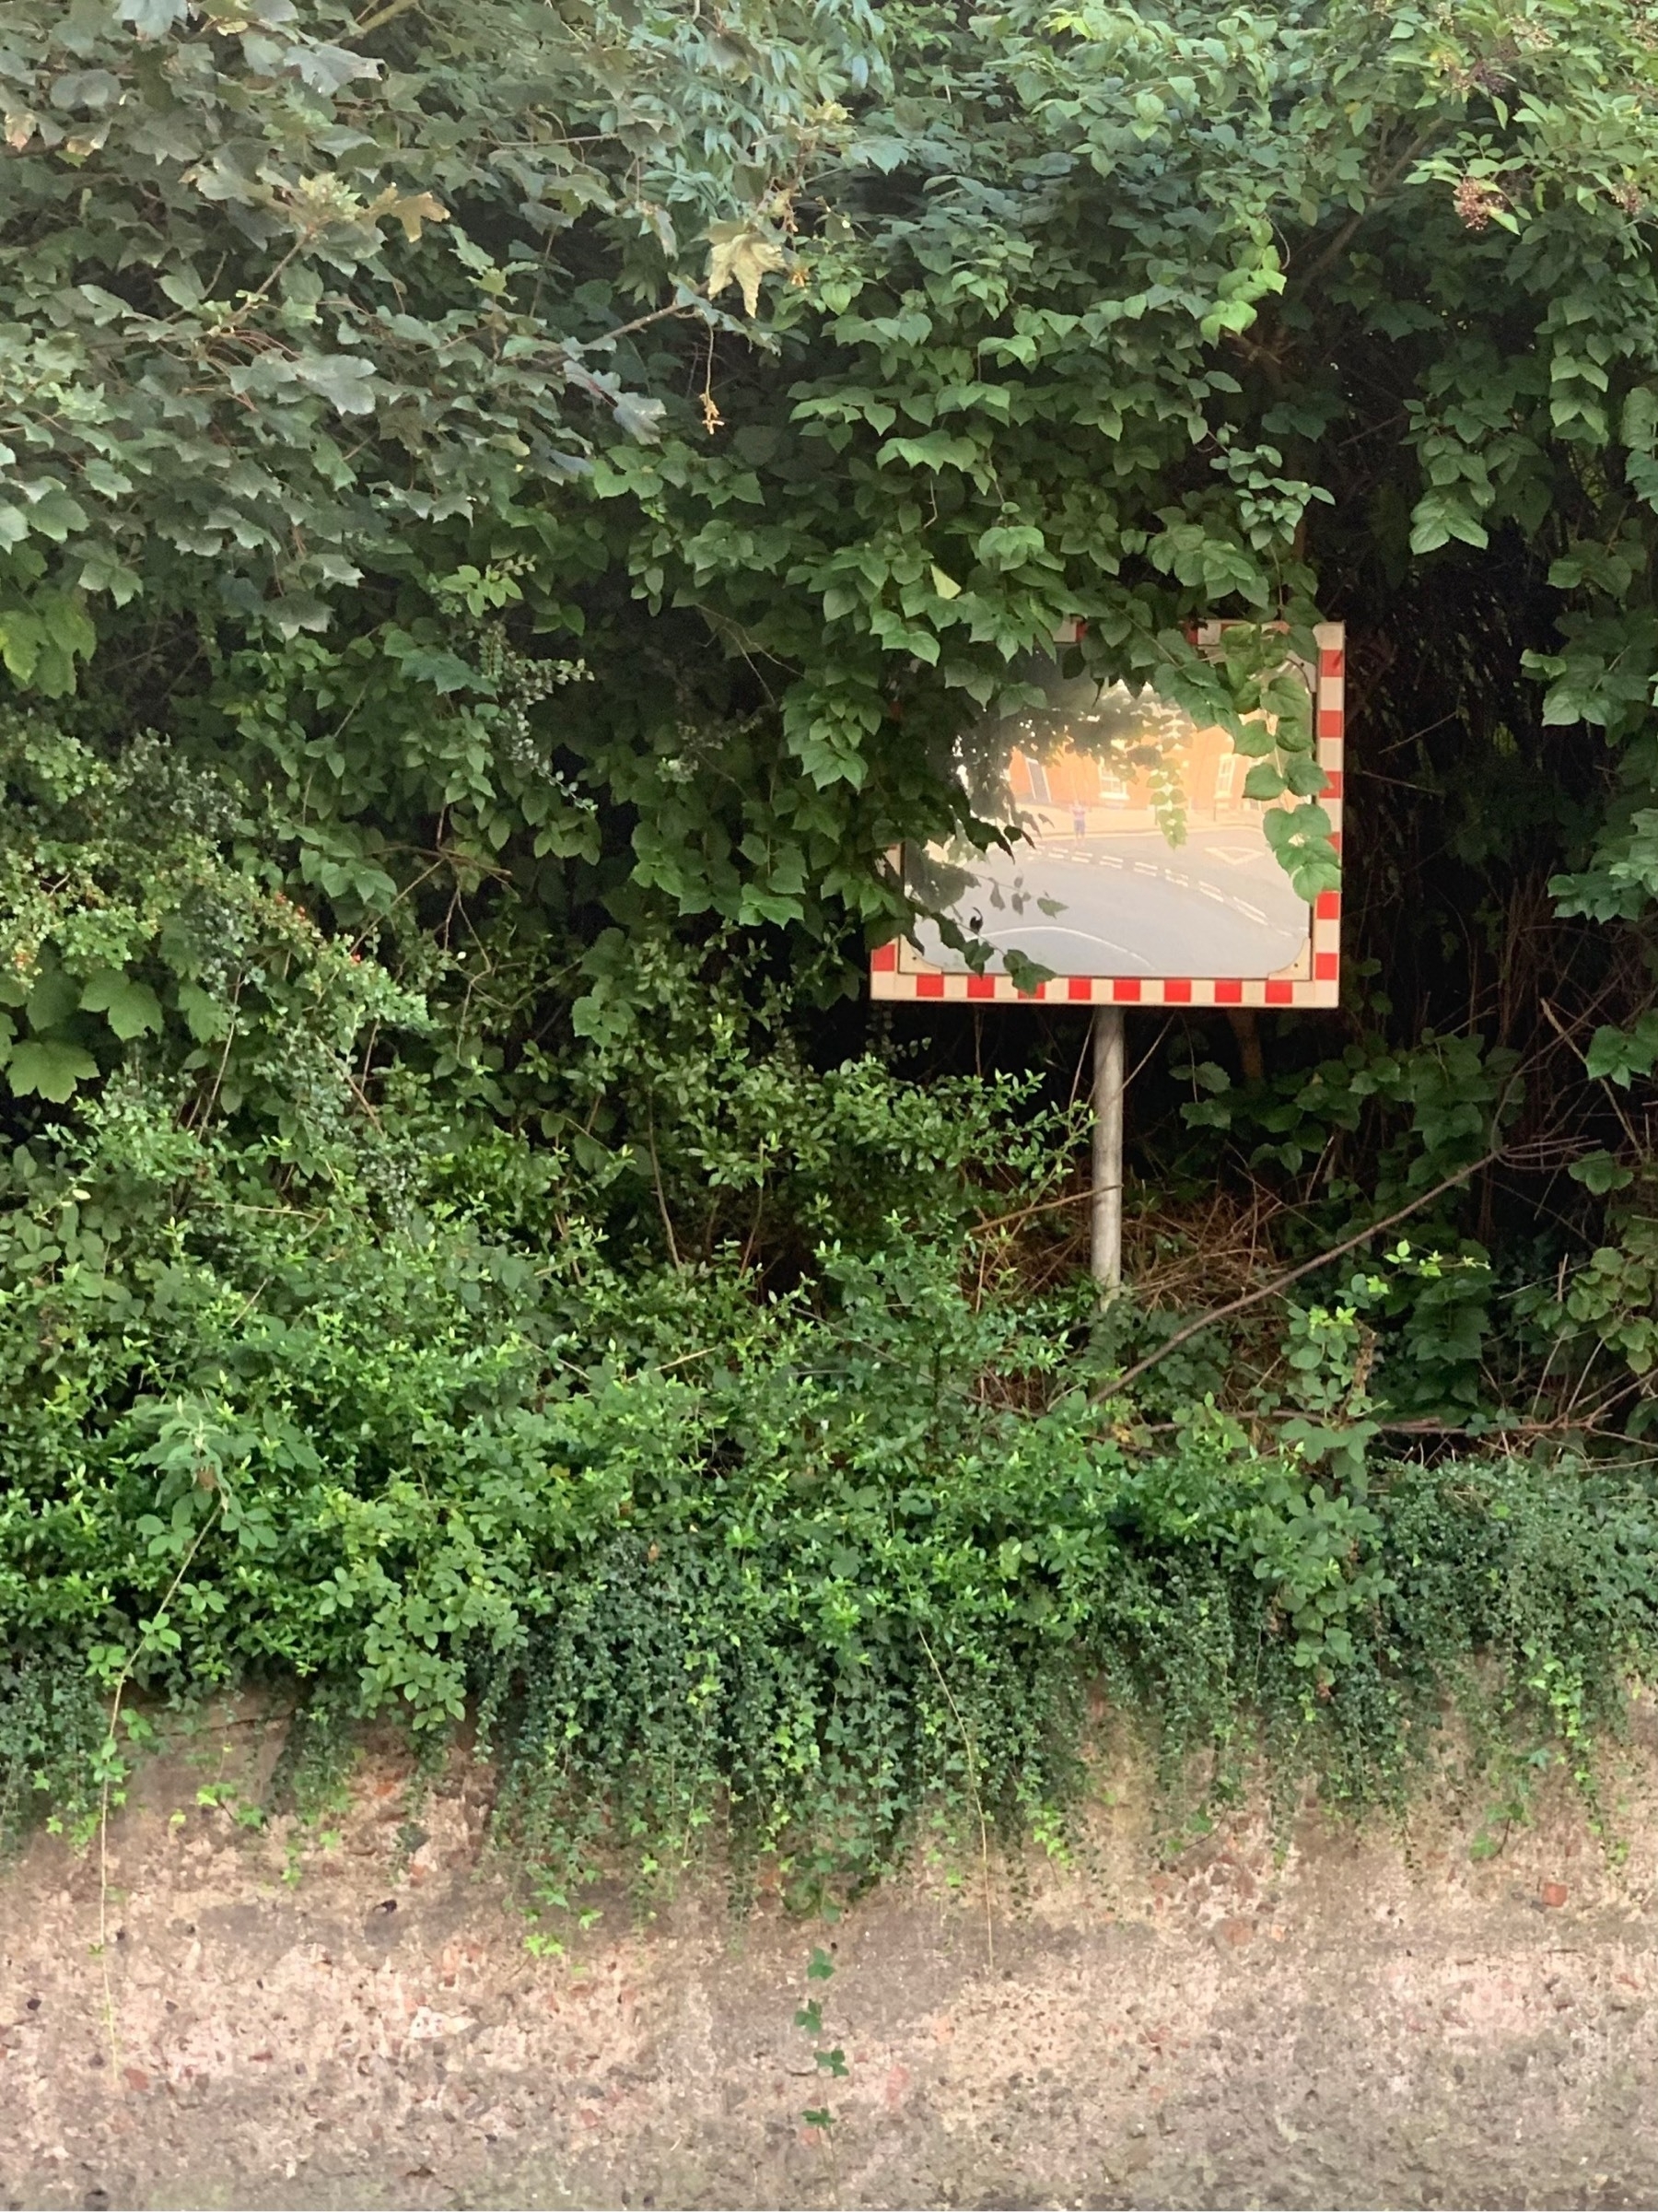 A mirrored traffic sign nestled in an overgrown wall.